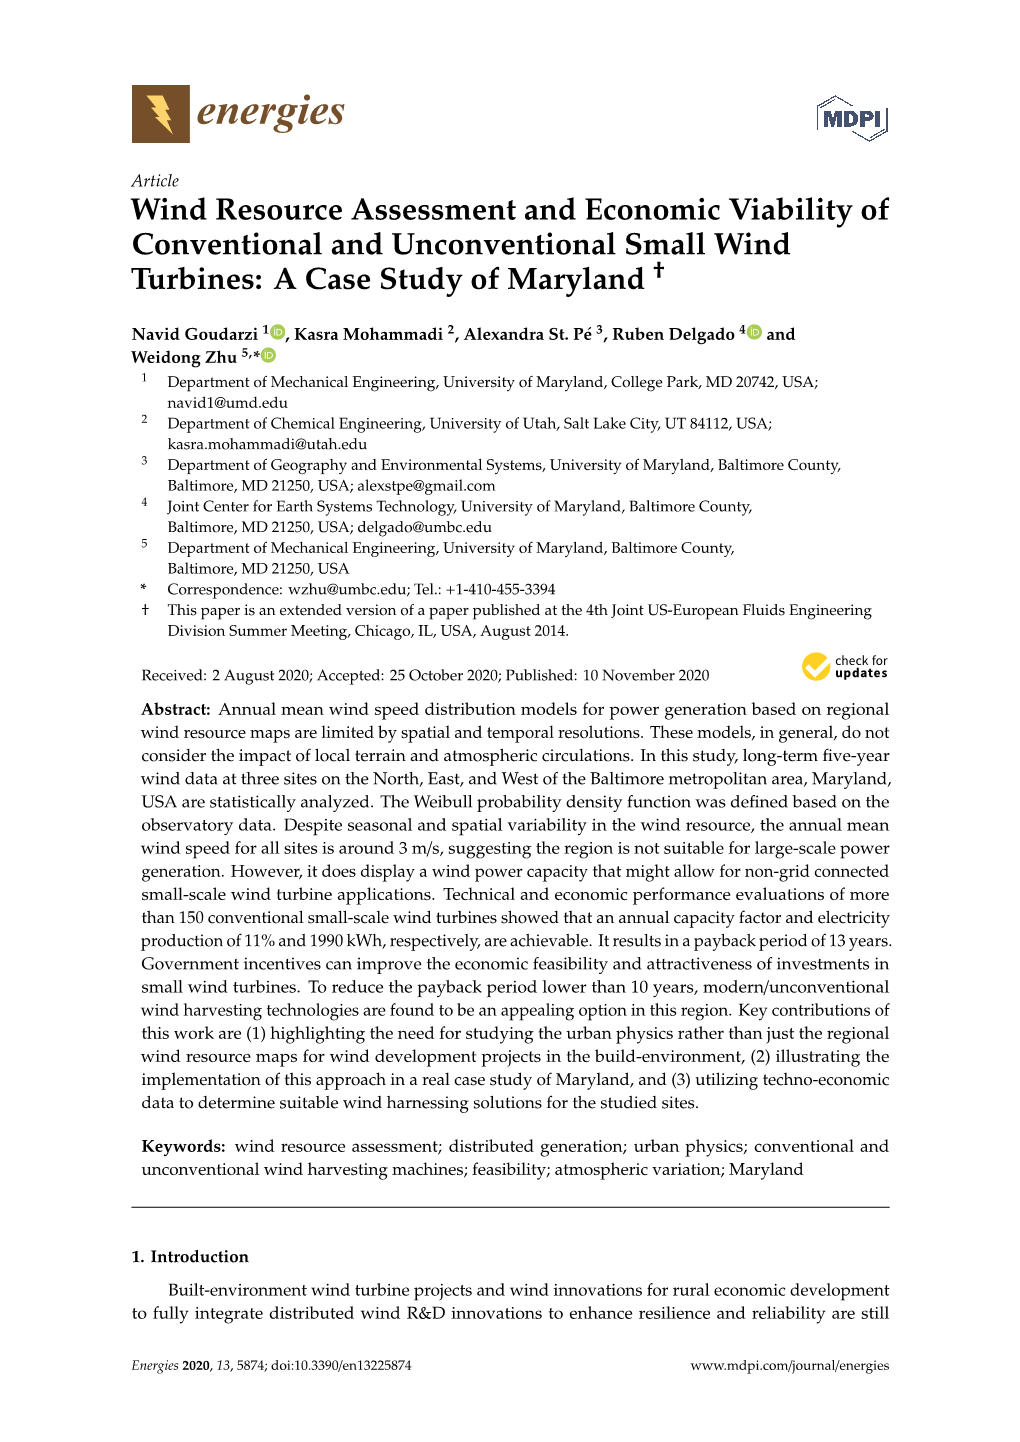 Wind Resource Assessment and Economic Viability of Conventional and Unconventional Small Wind † Turbines: a Case Study of Maryland